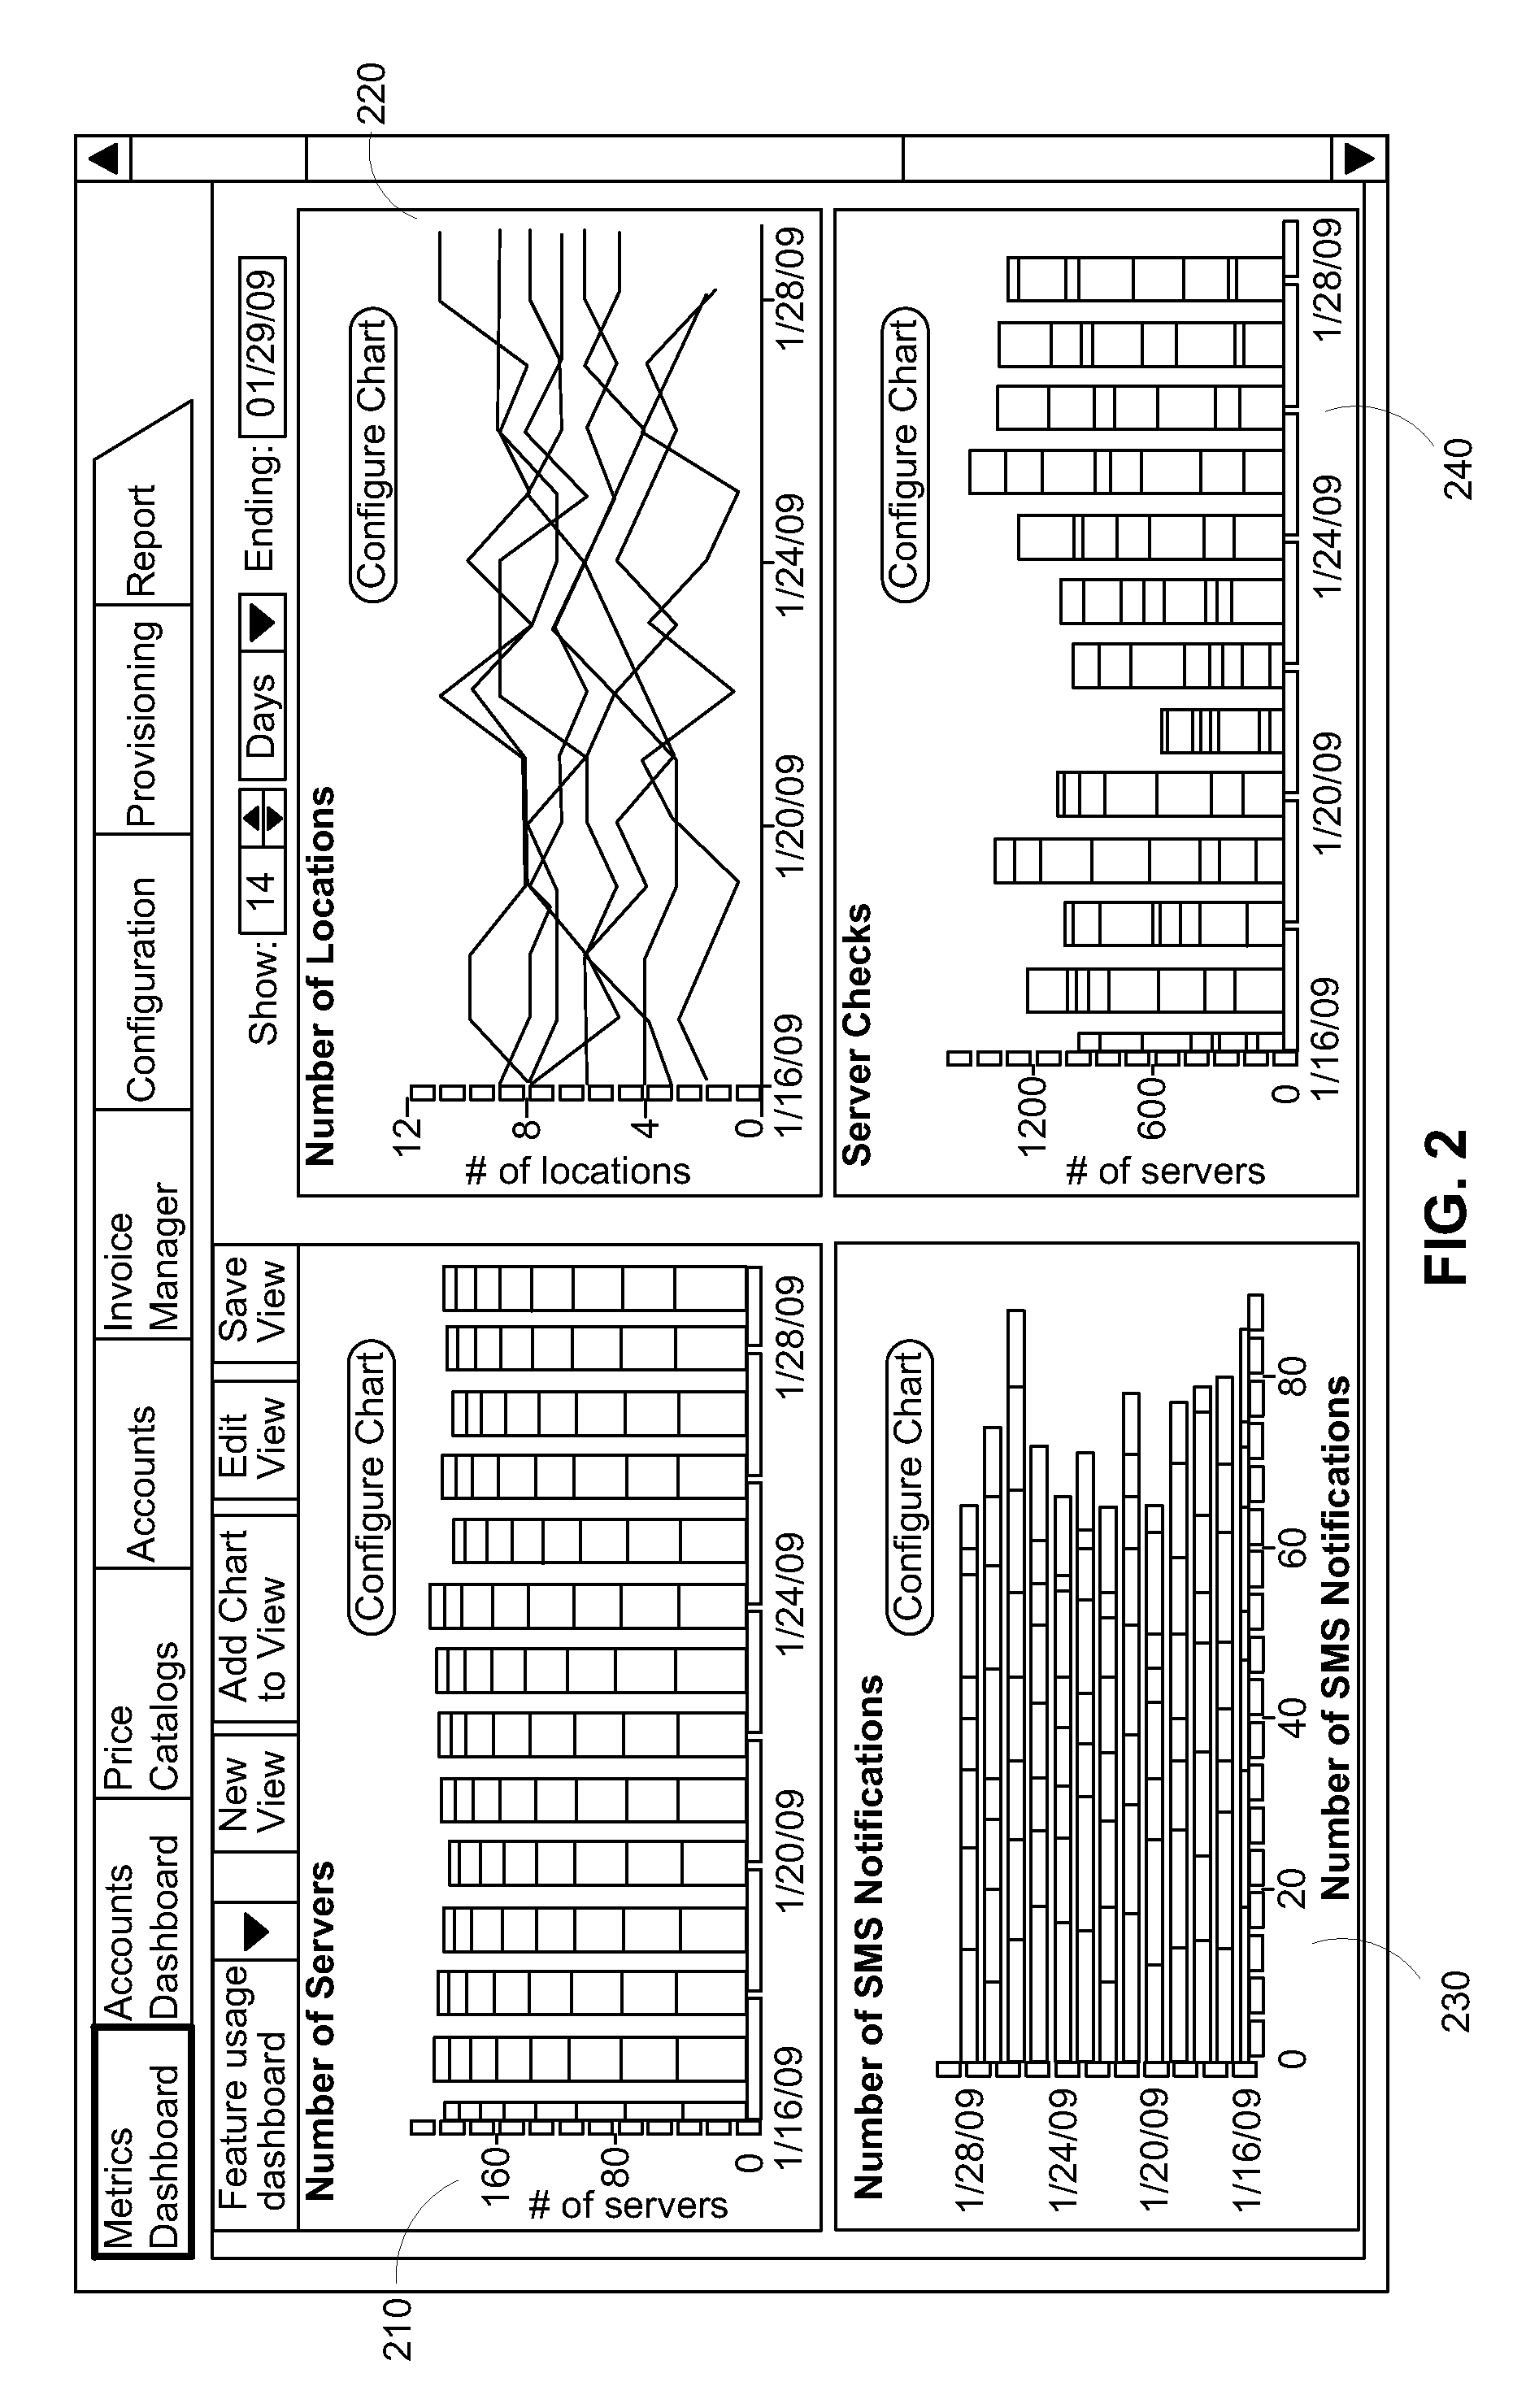 Systems and methods for metered software as a service